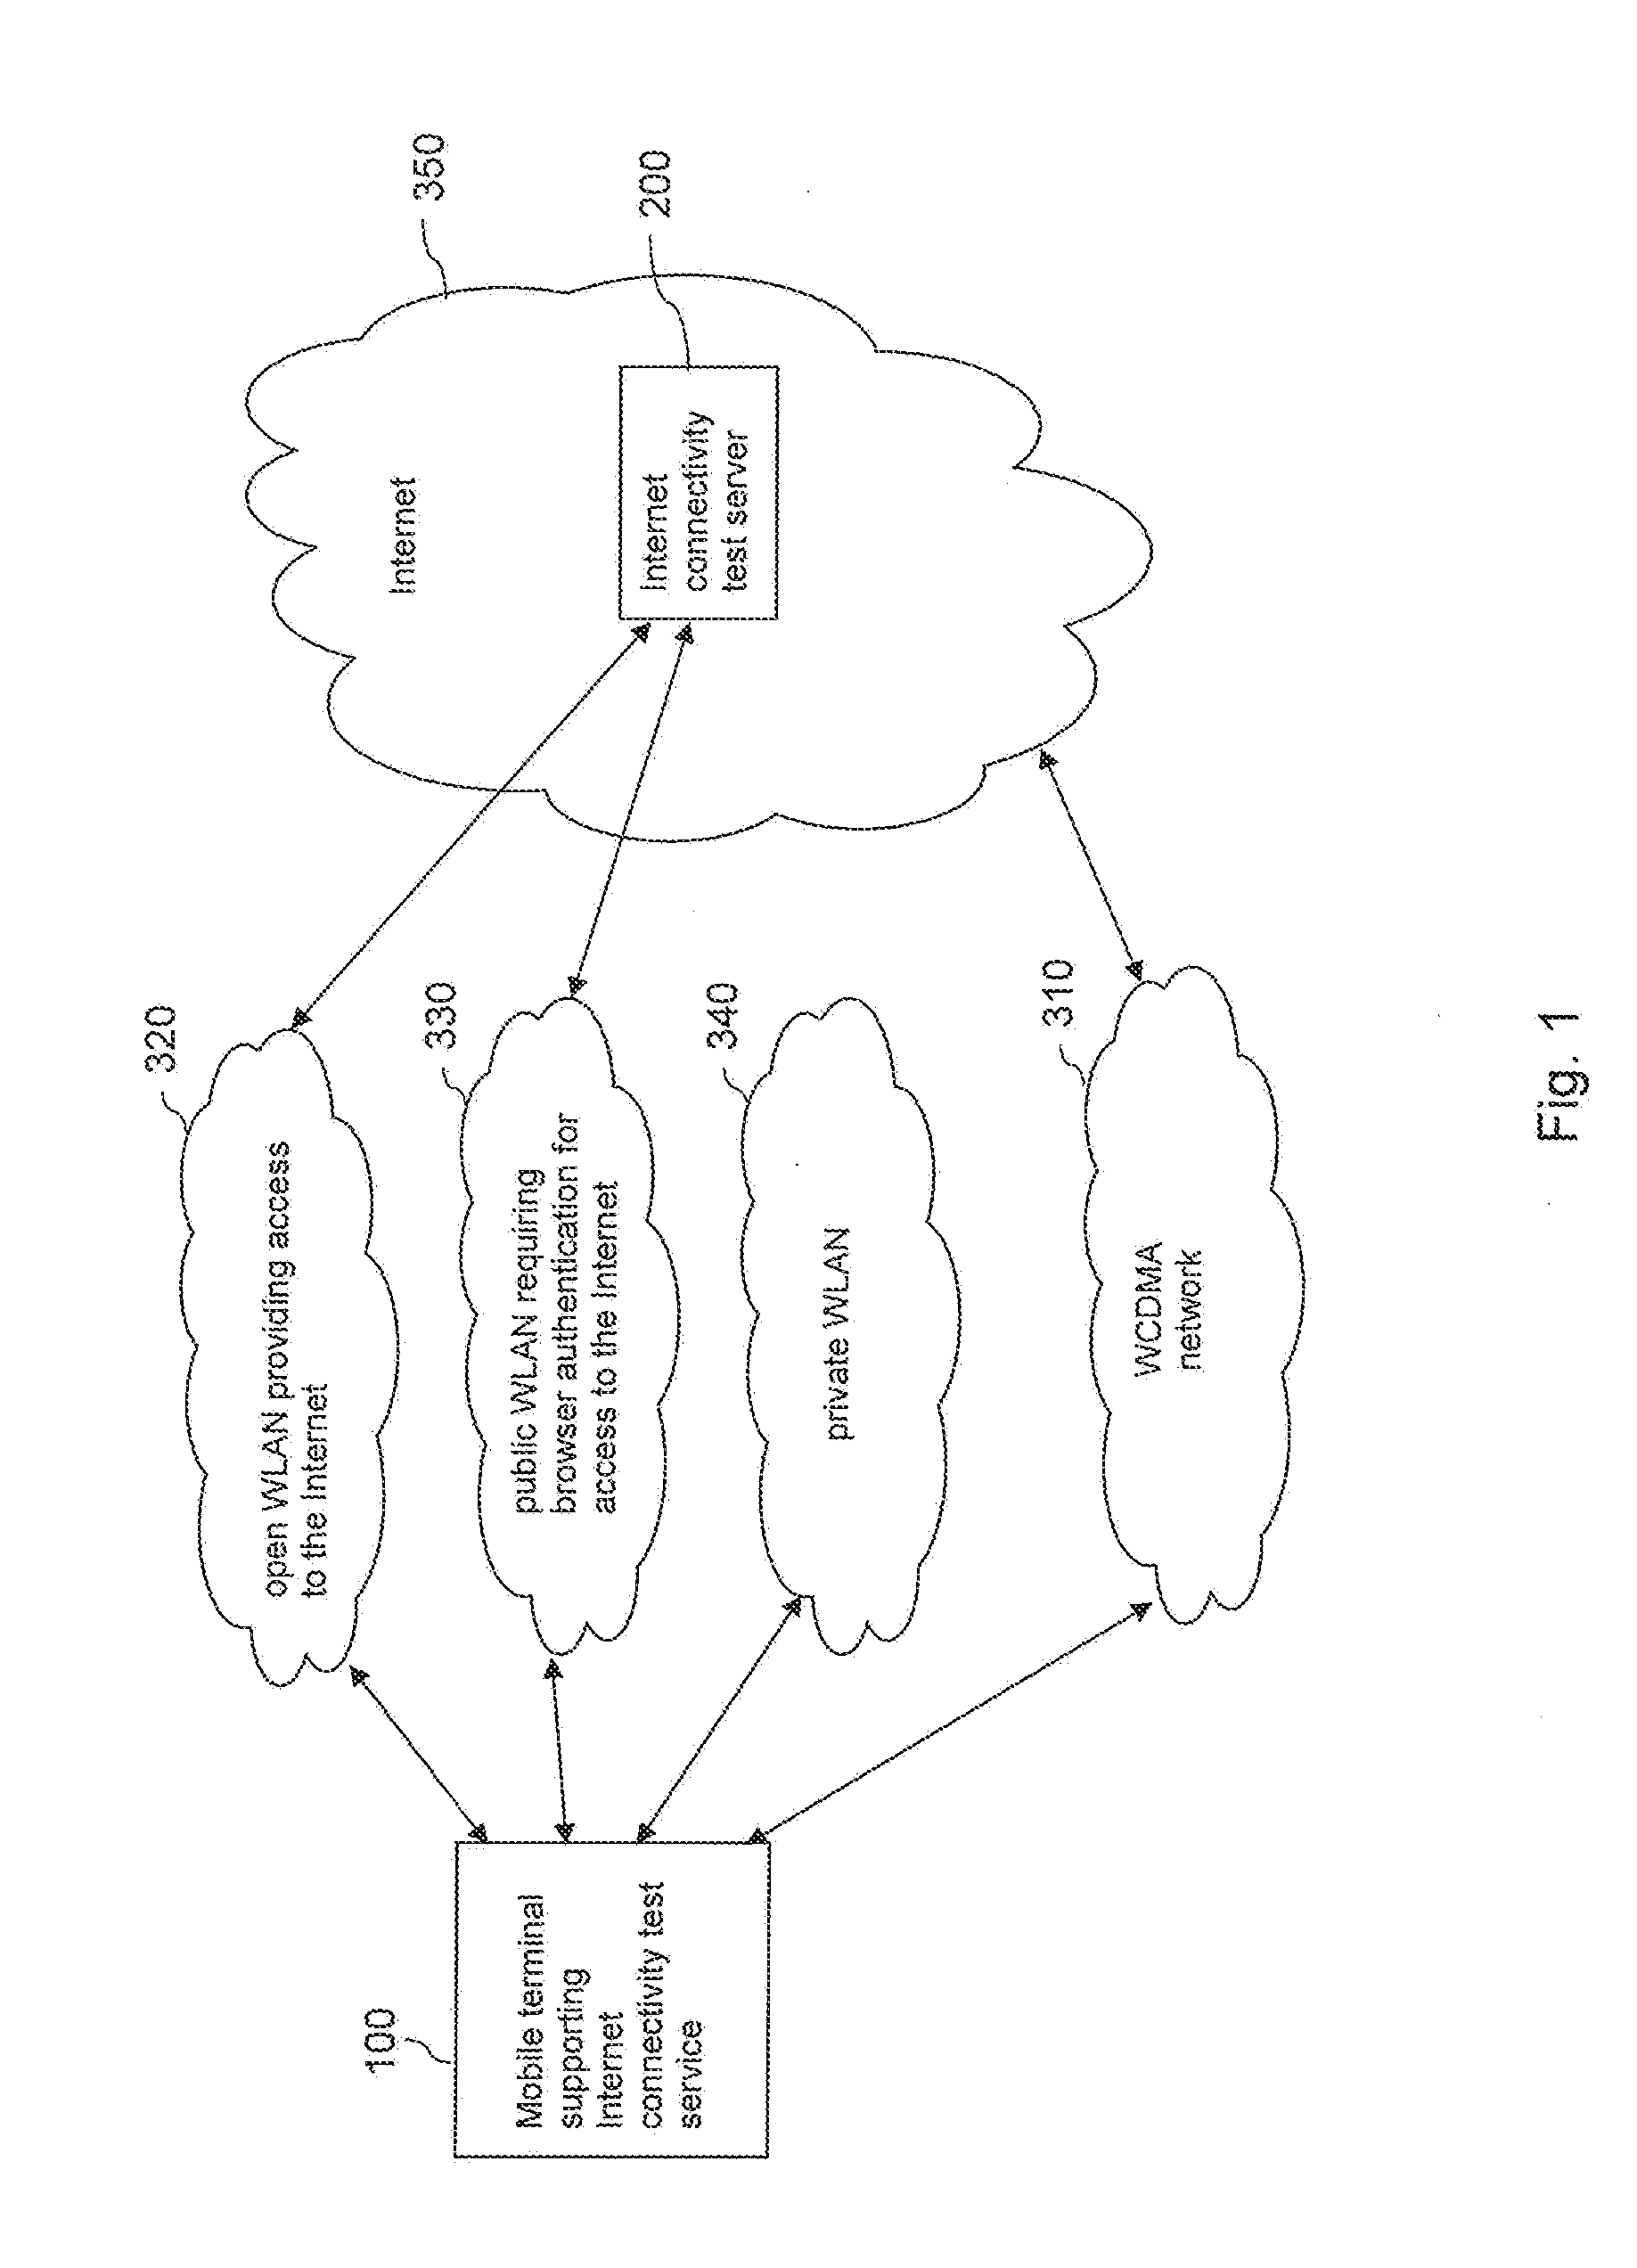 Supporting an Access to a Destination Network Via a Wireless Access Network